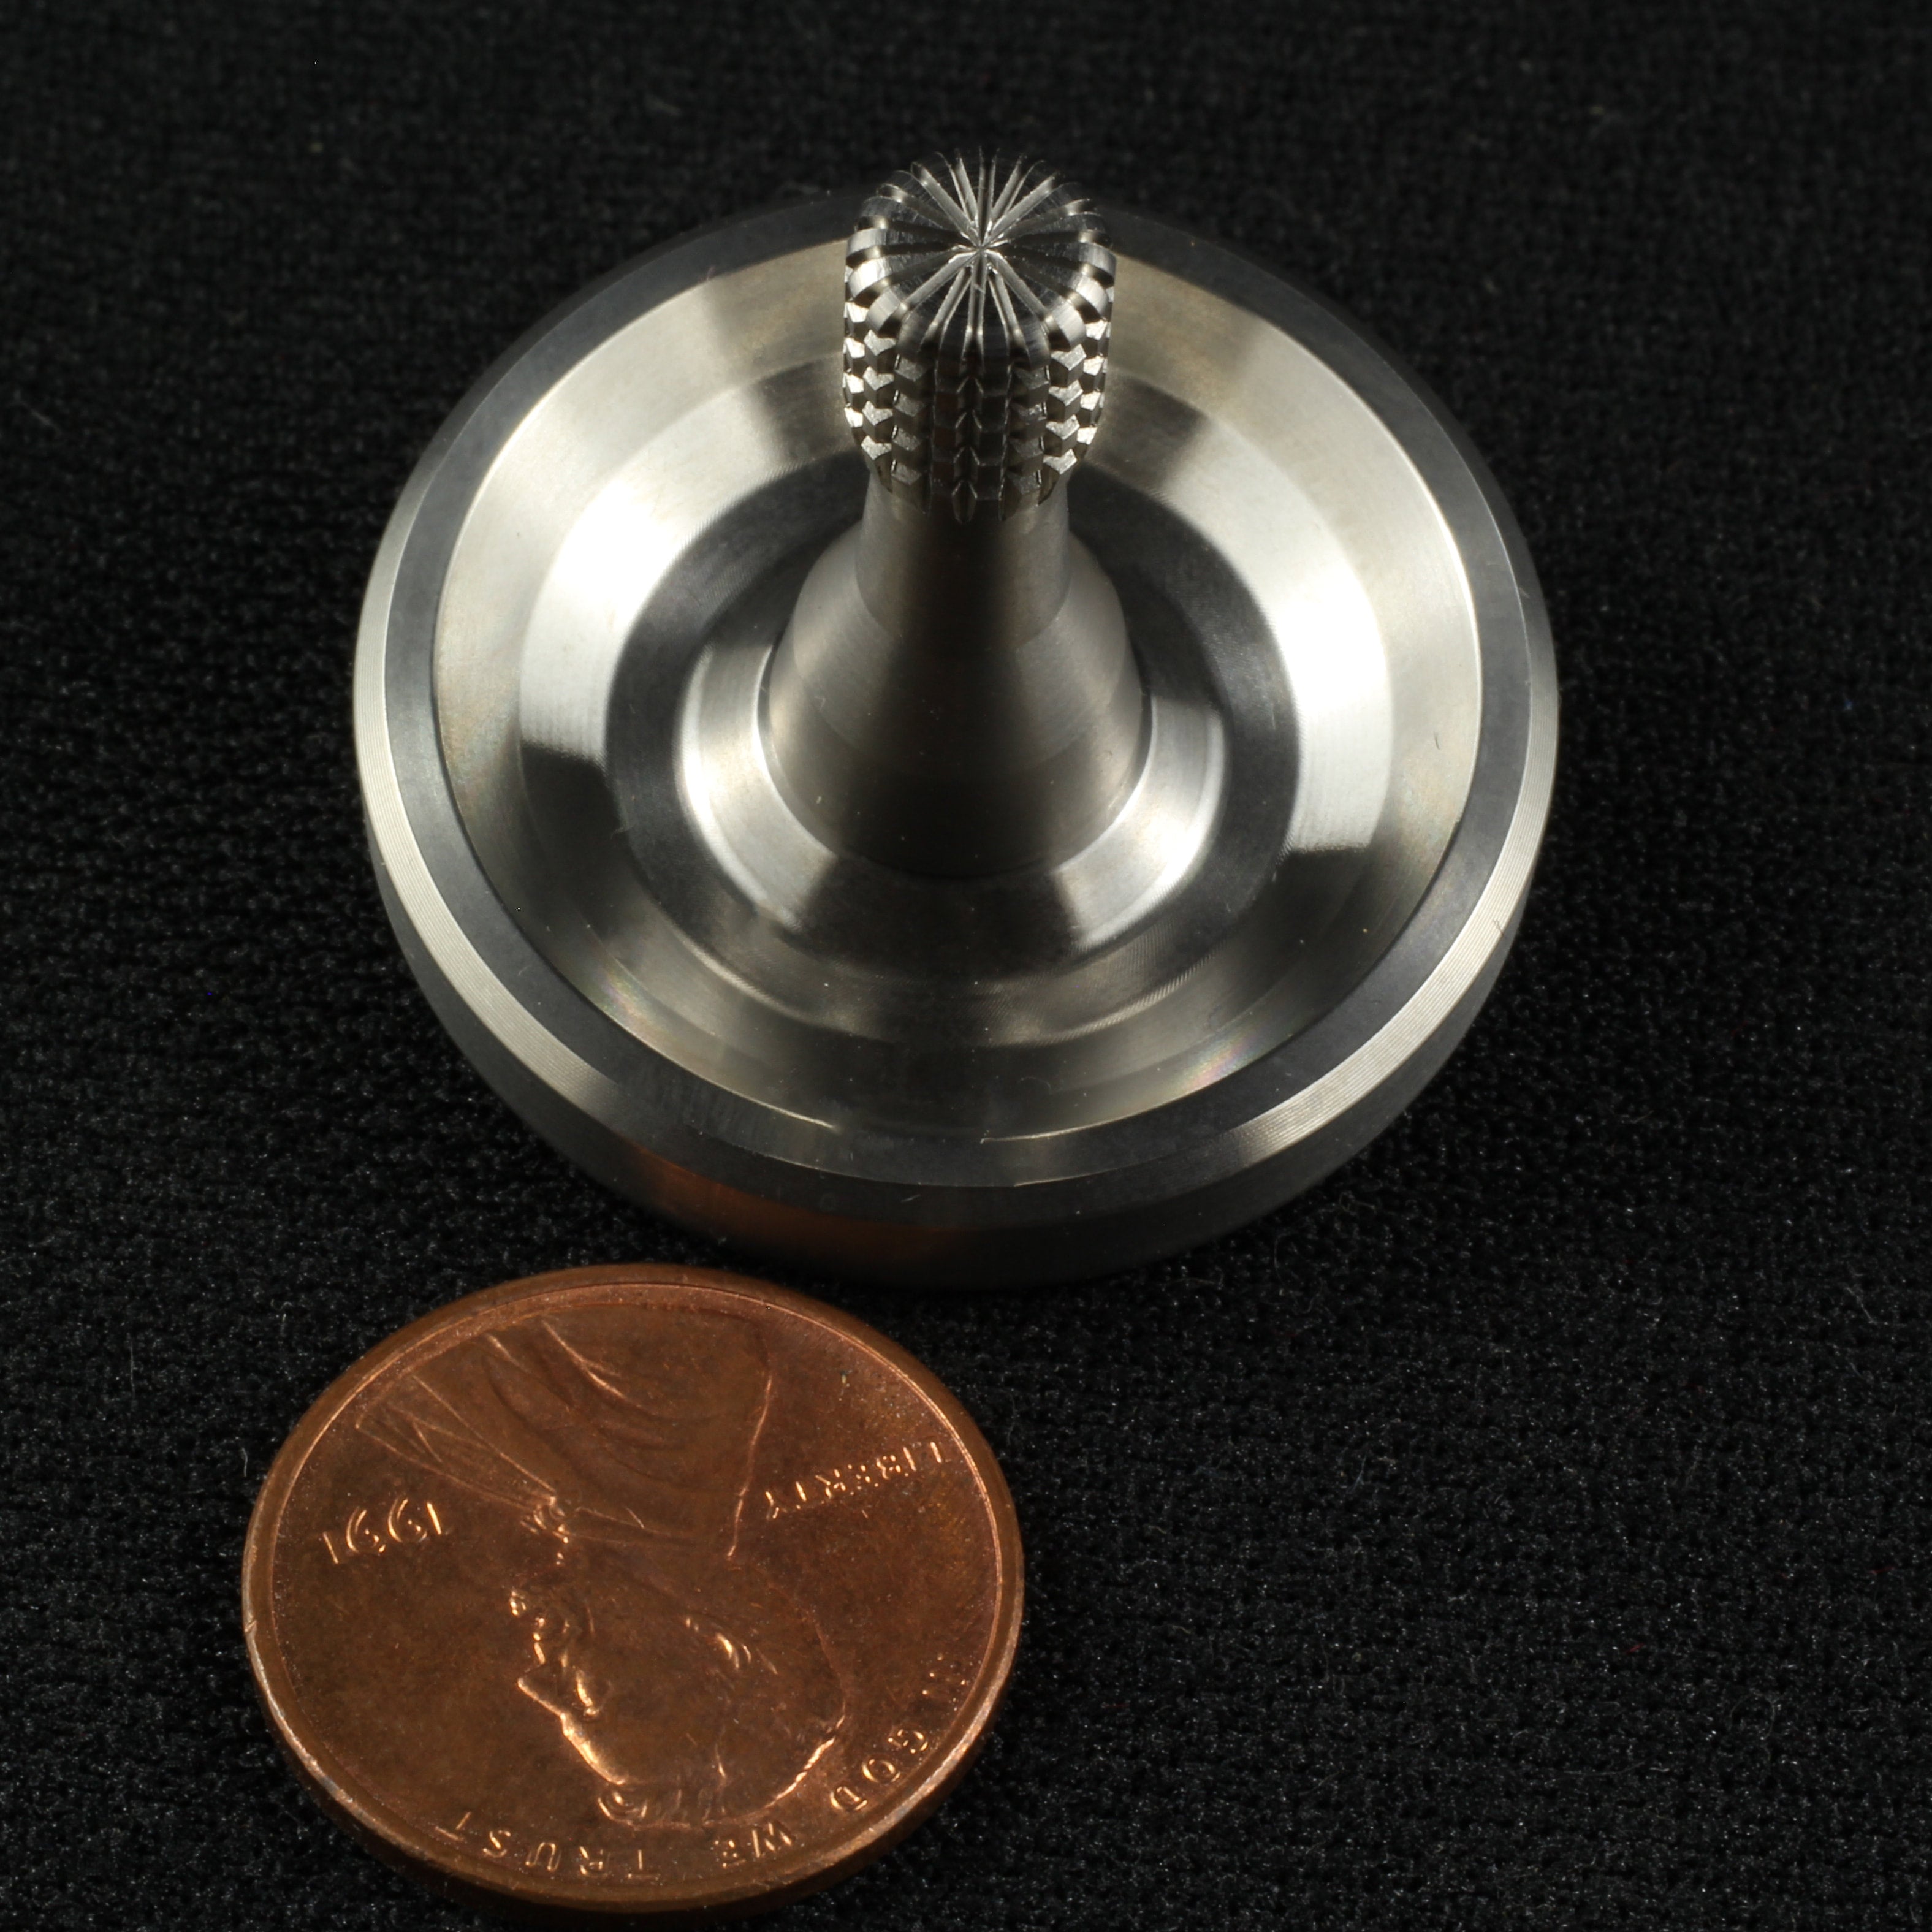 Spinoff stainless steel spinning top